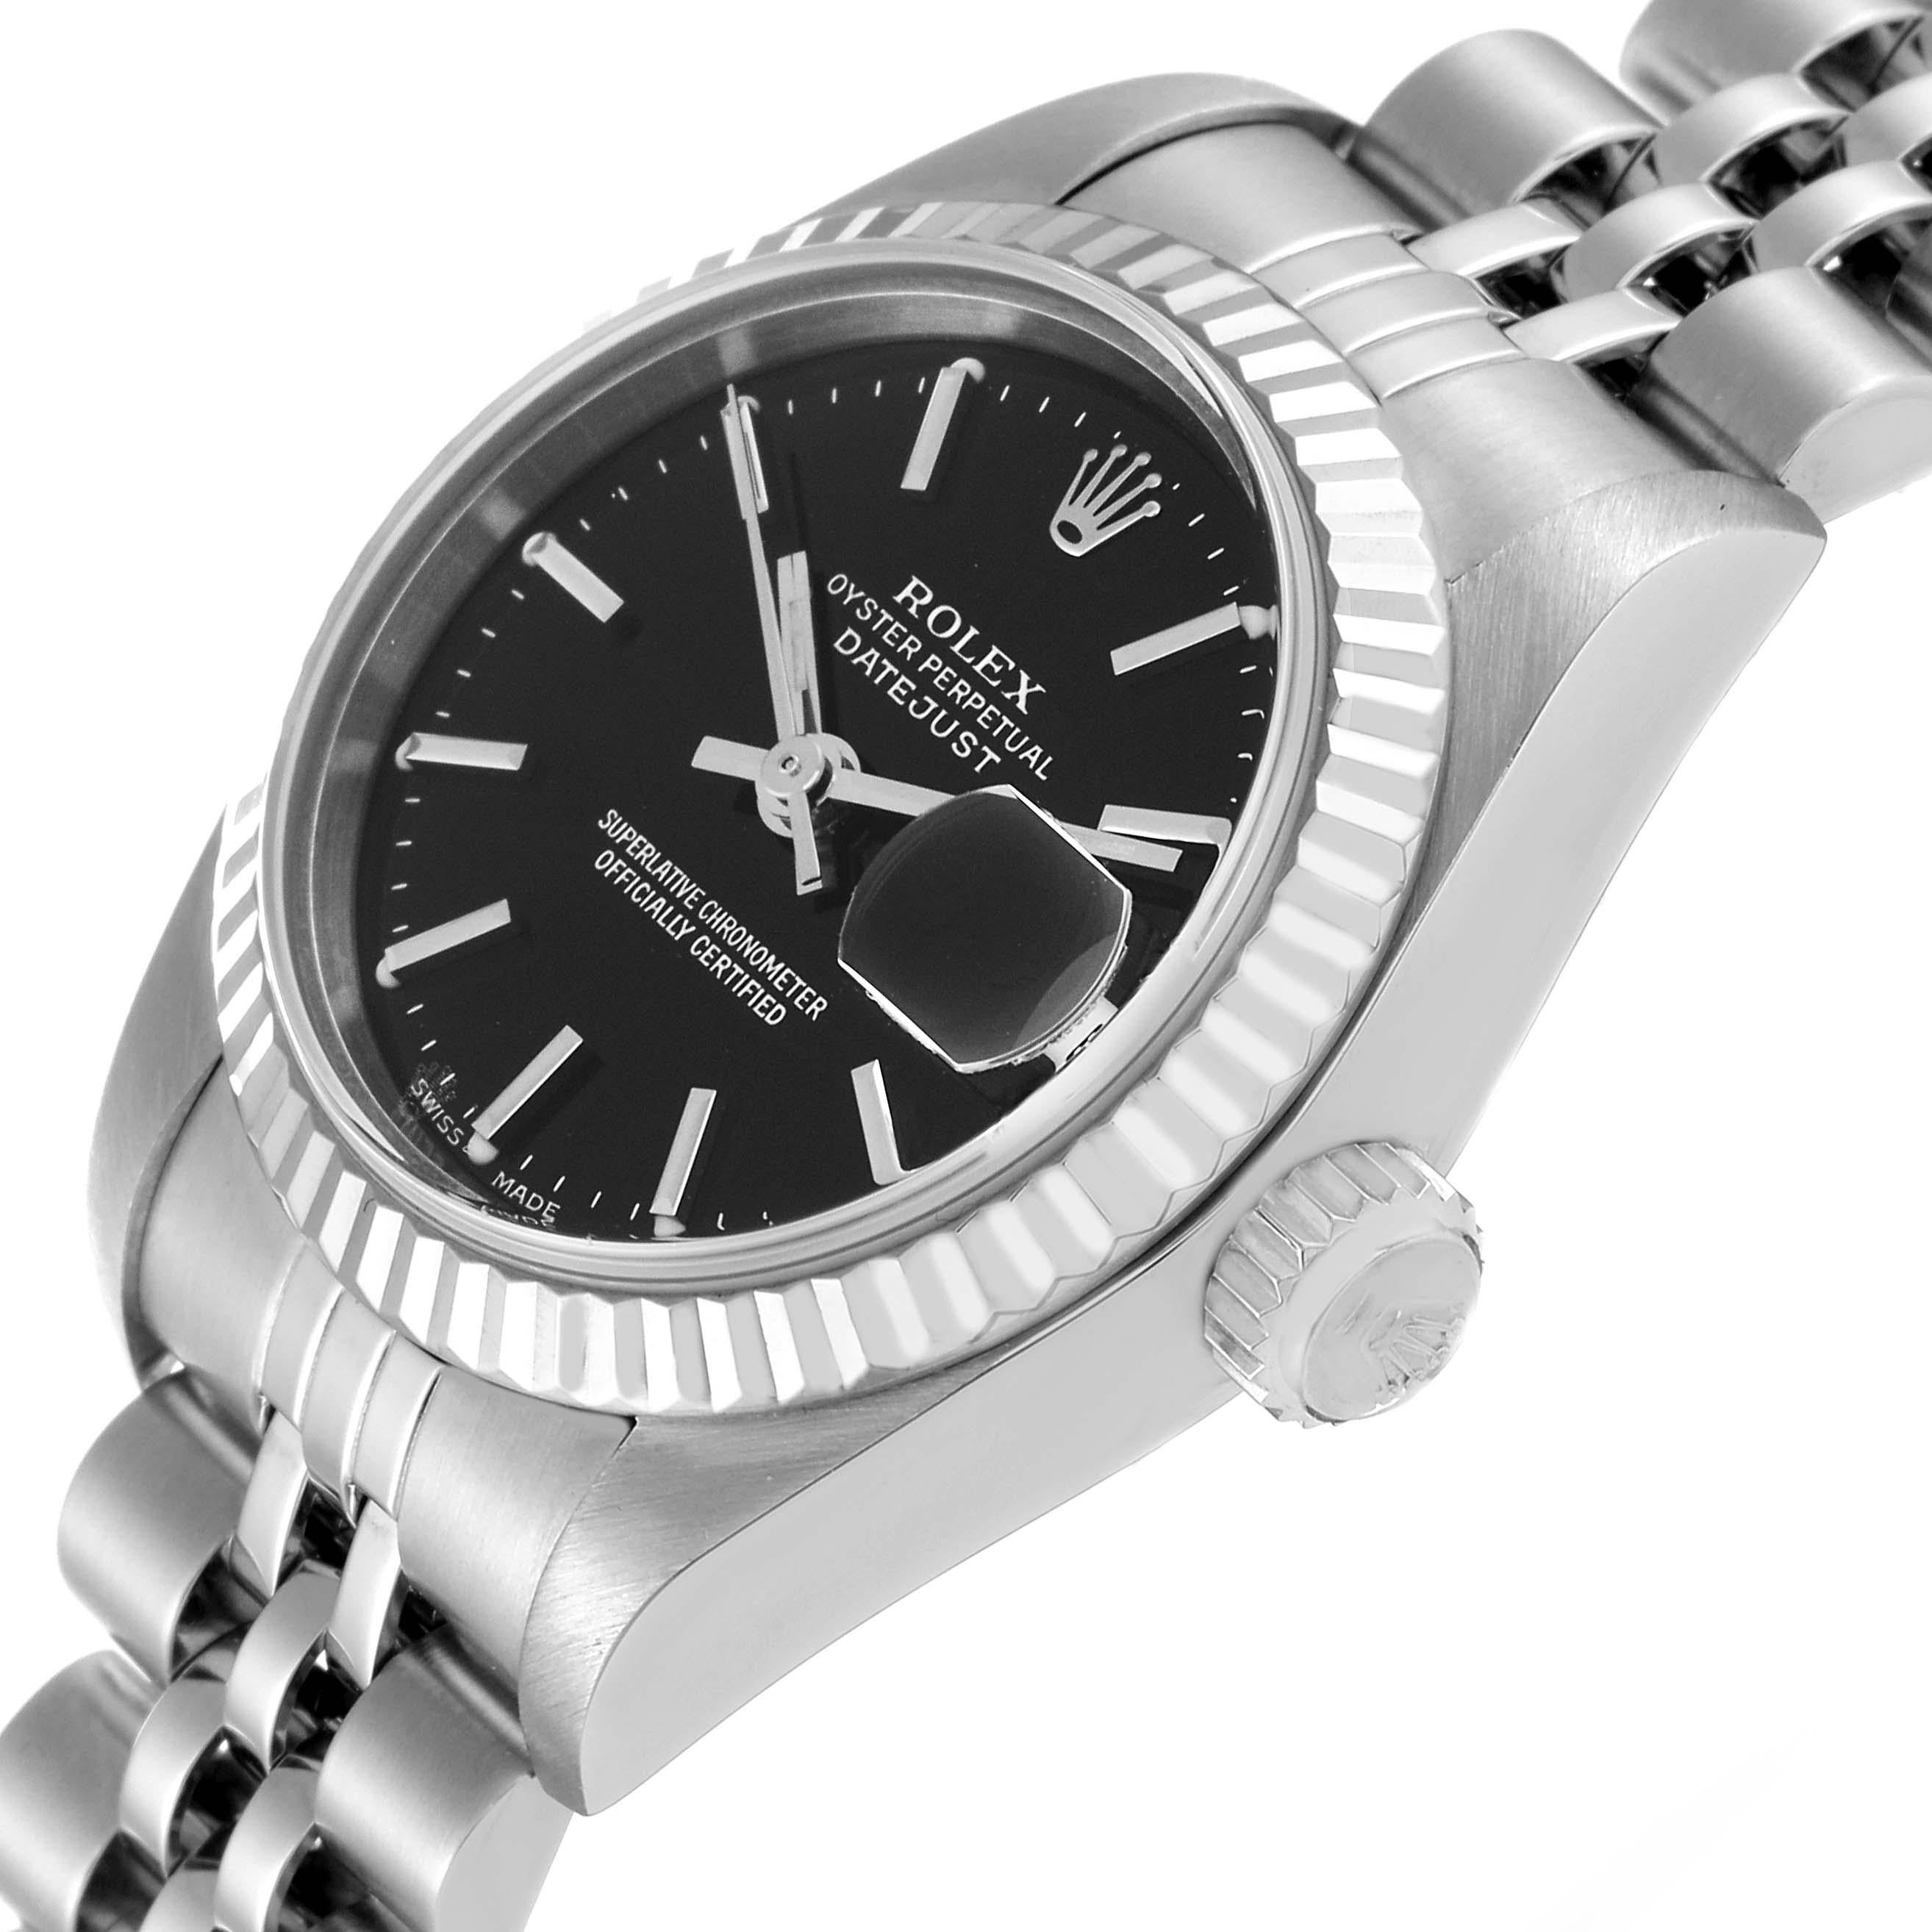 Rolex Datejust 26 Steel White Gold Black Dial Ladies Watch 79174 Box Papers 6